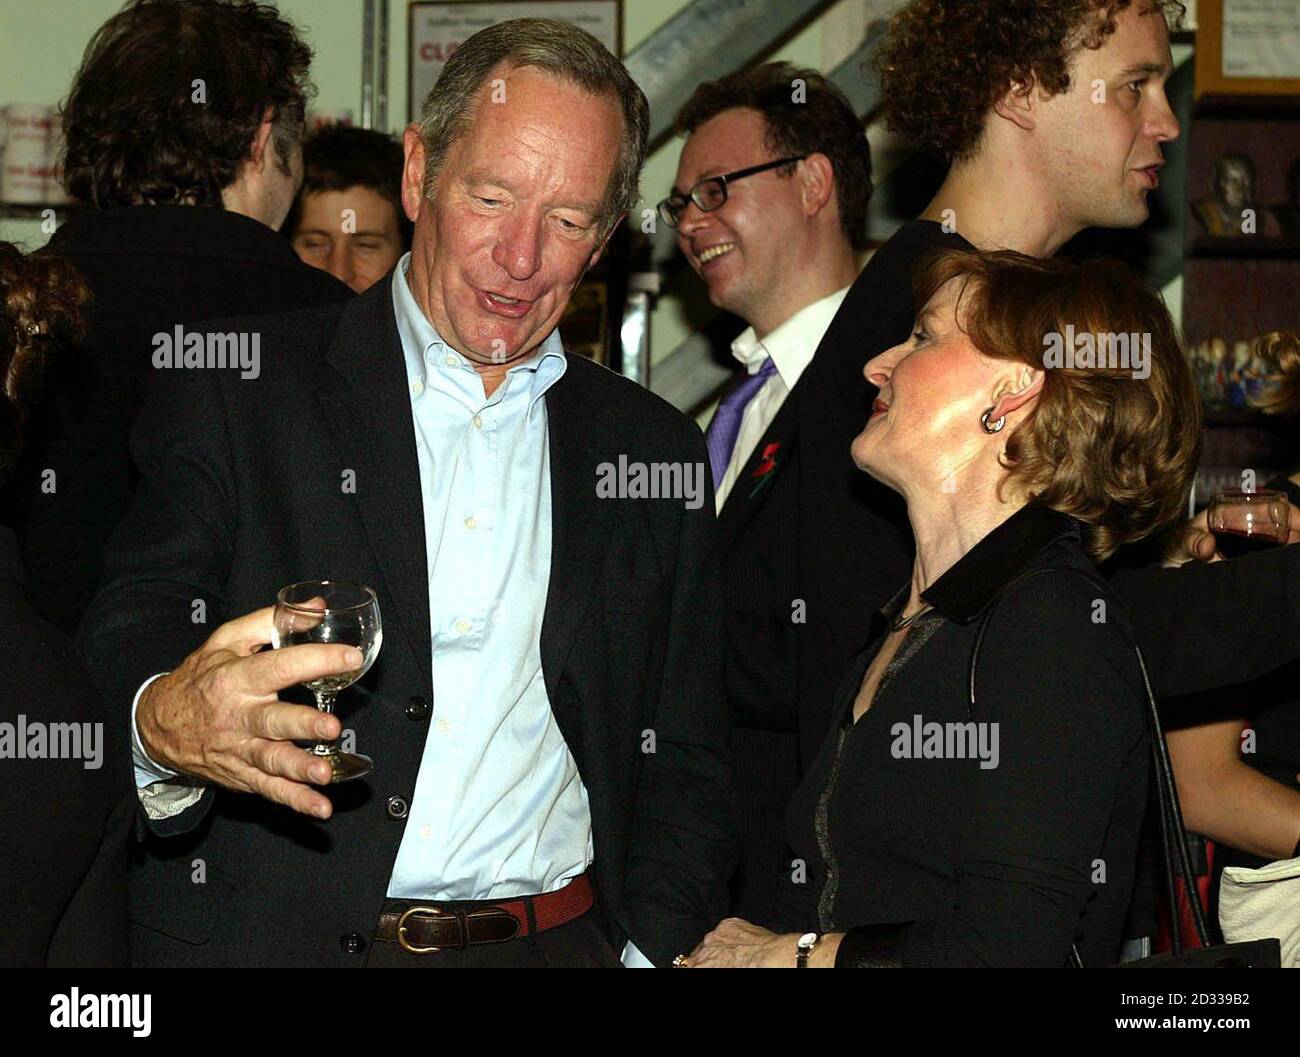 Michael Buerk and Lady Fiona Fowler at the book launch of Oliver Poole's 'Black Knights' in central London. Stock Photo